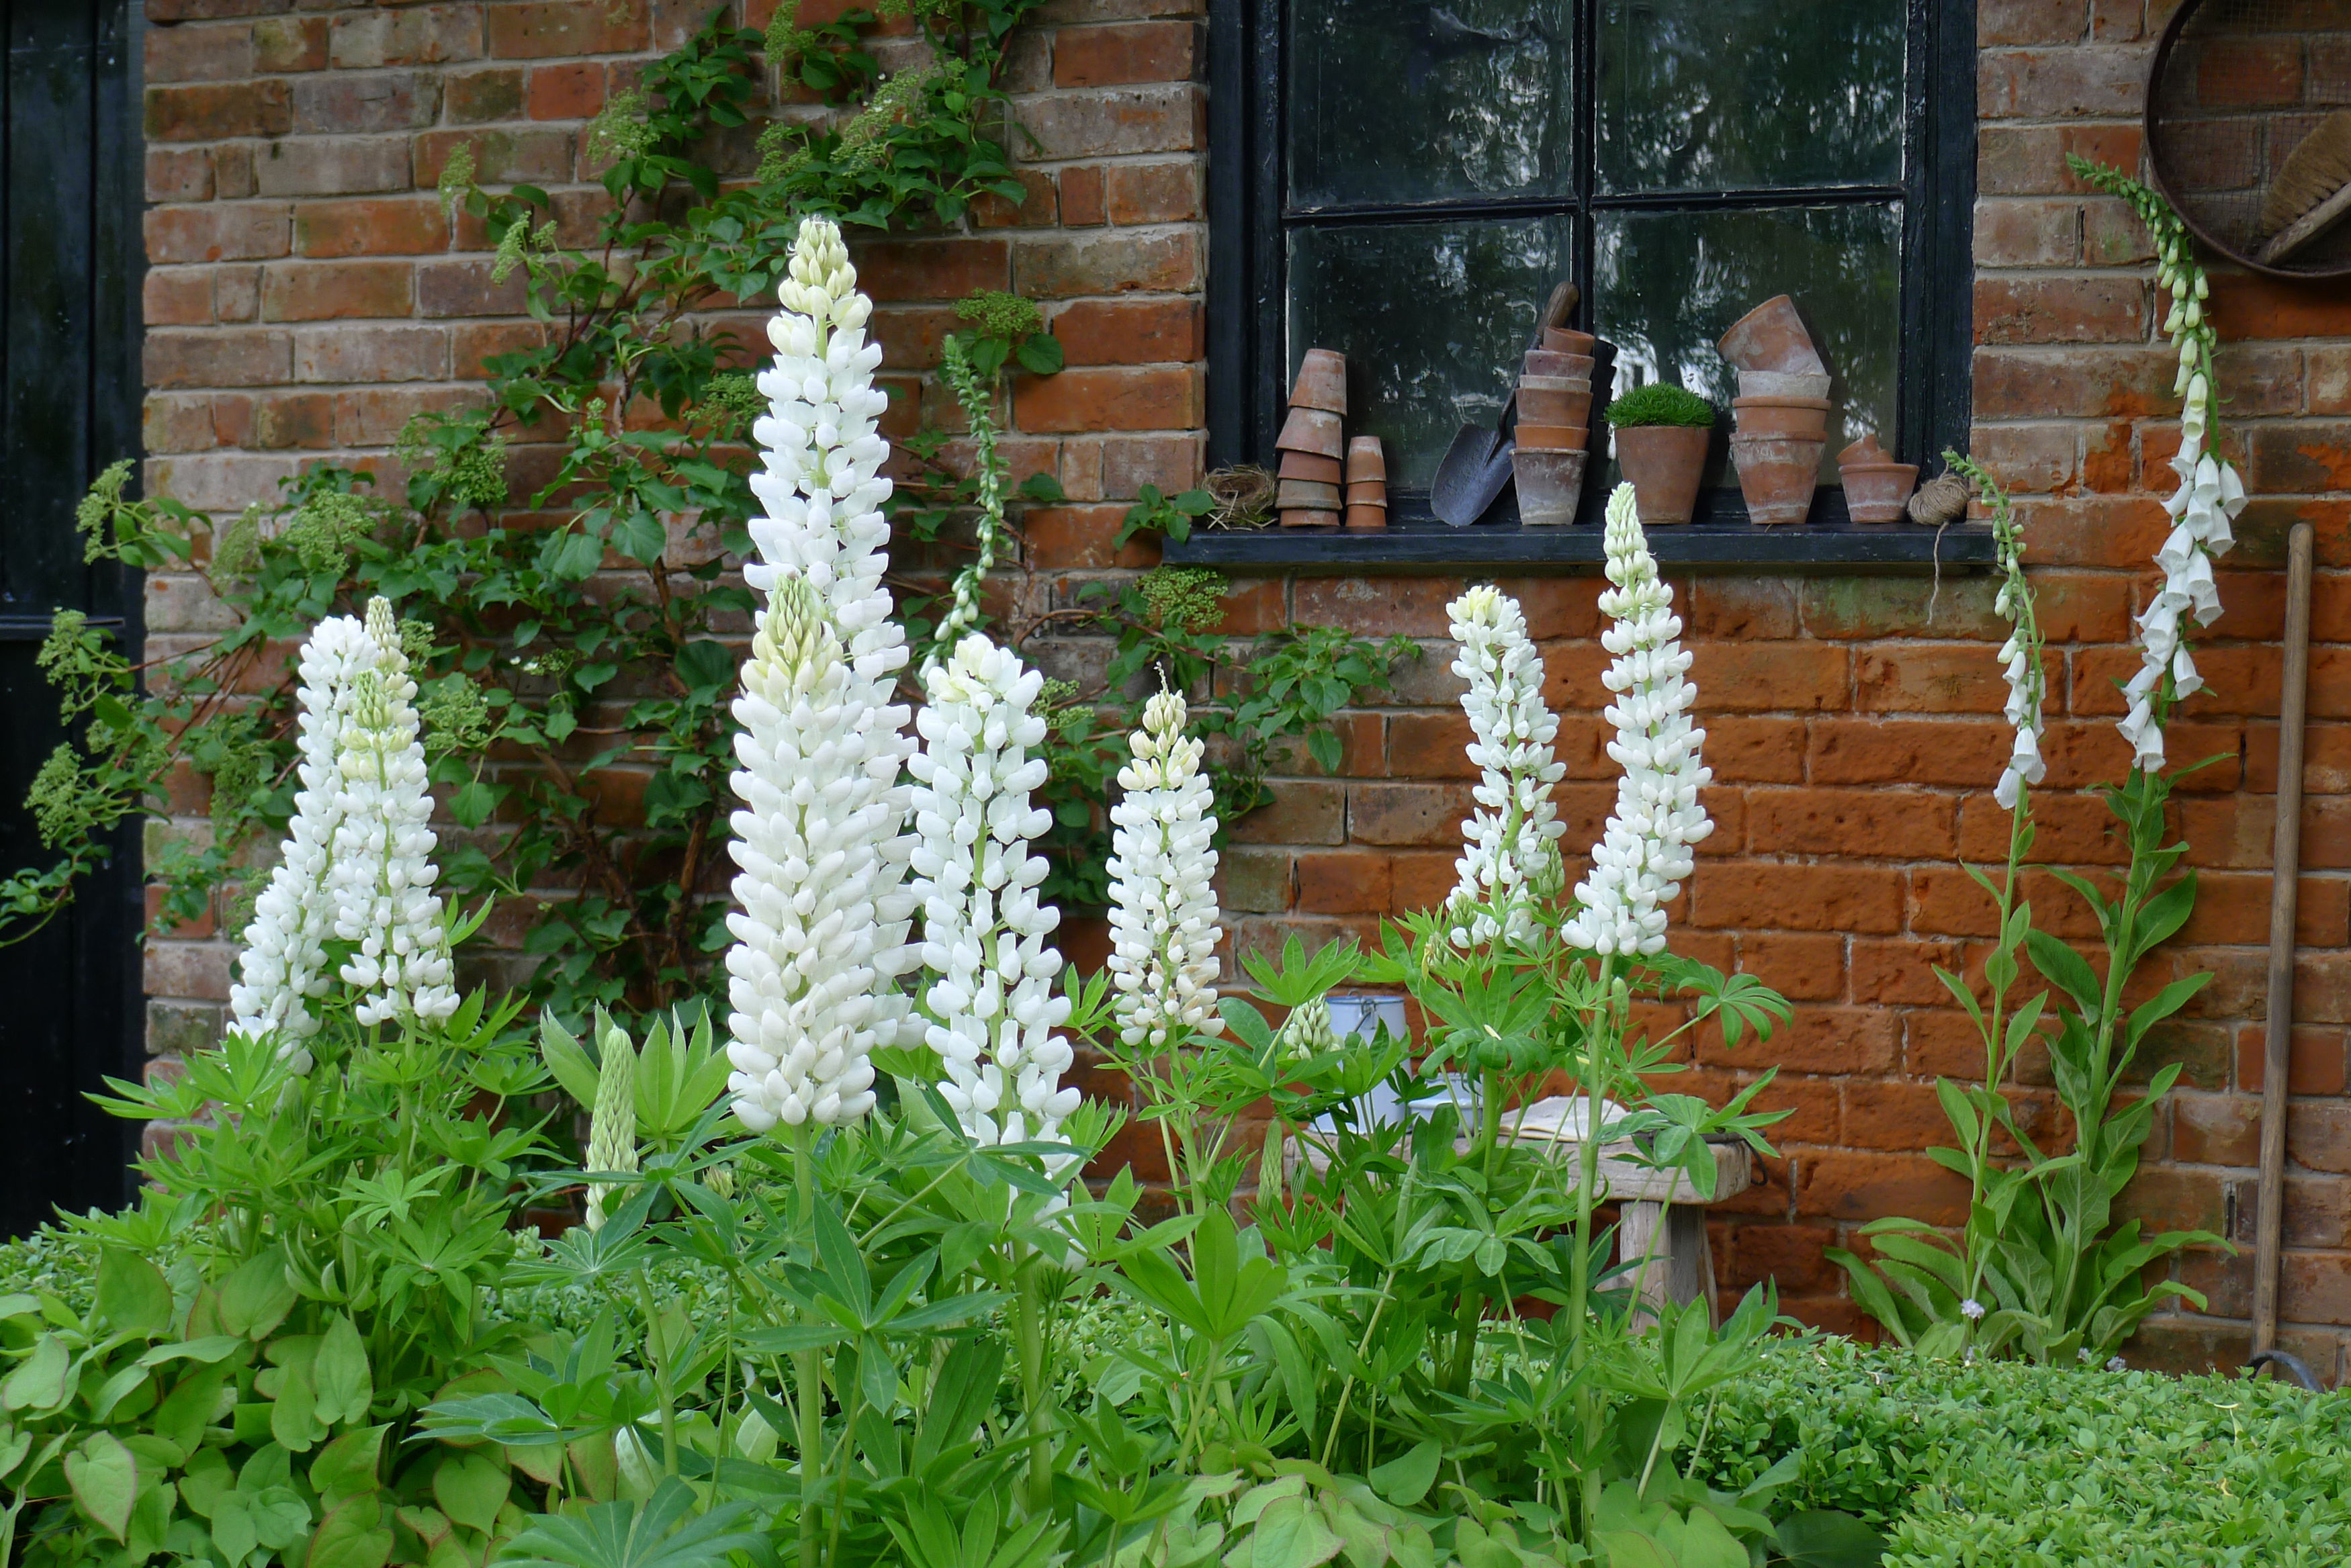 Lupins may be on offer (Hannah Stephenson/PA)